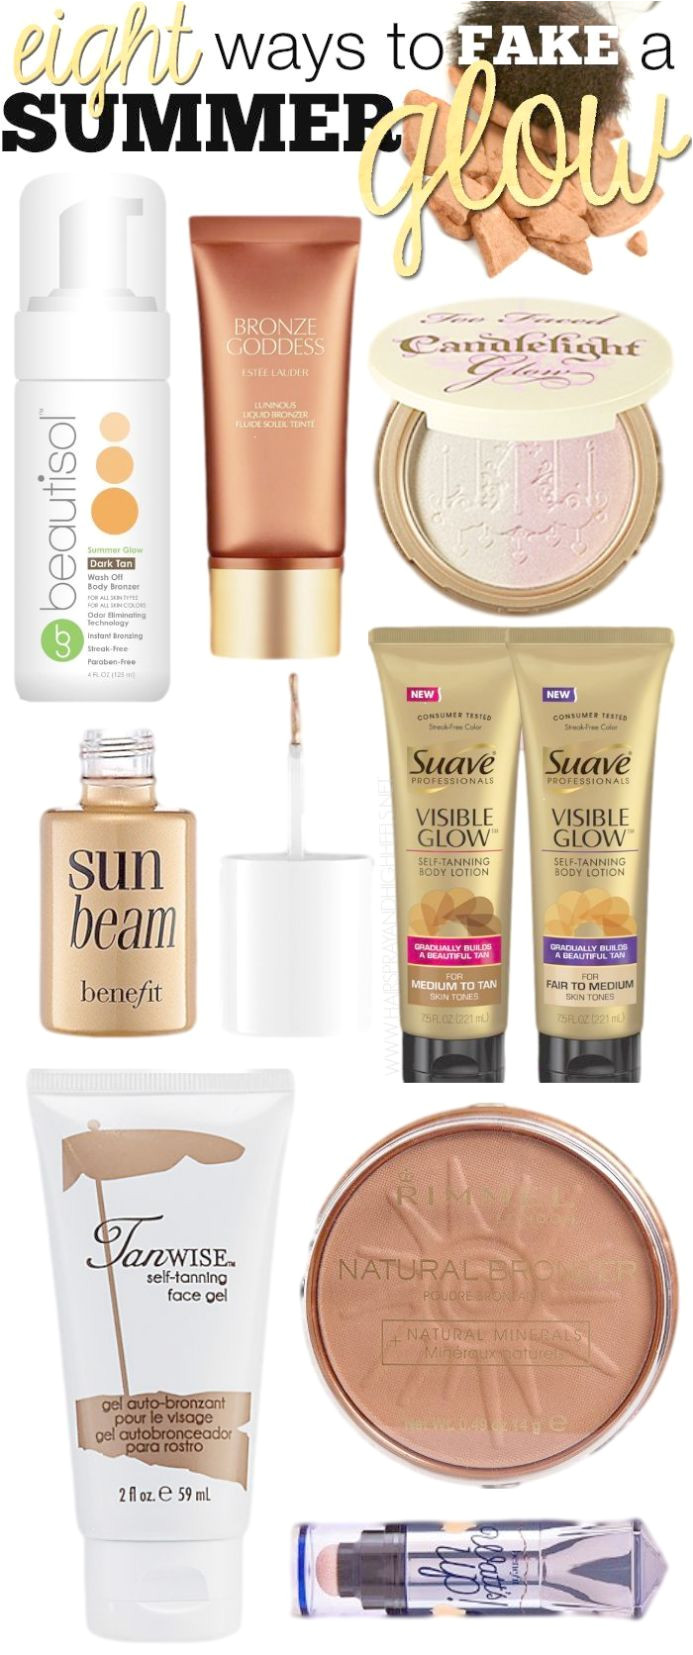 8 ways to fake a summer glow winter has been wreaking havoc well into spring around these parts its about time we give it the ol kick in the butt